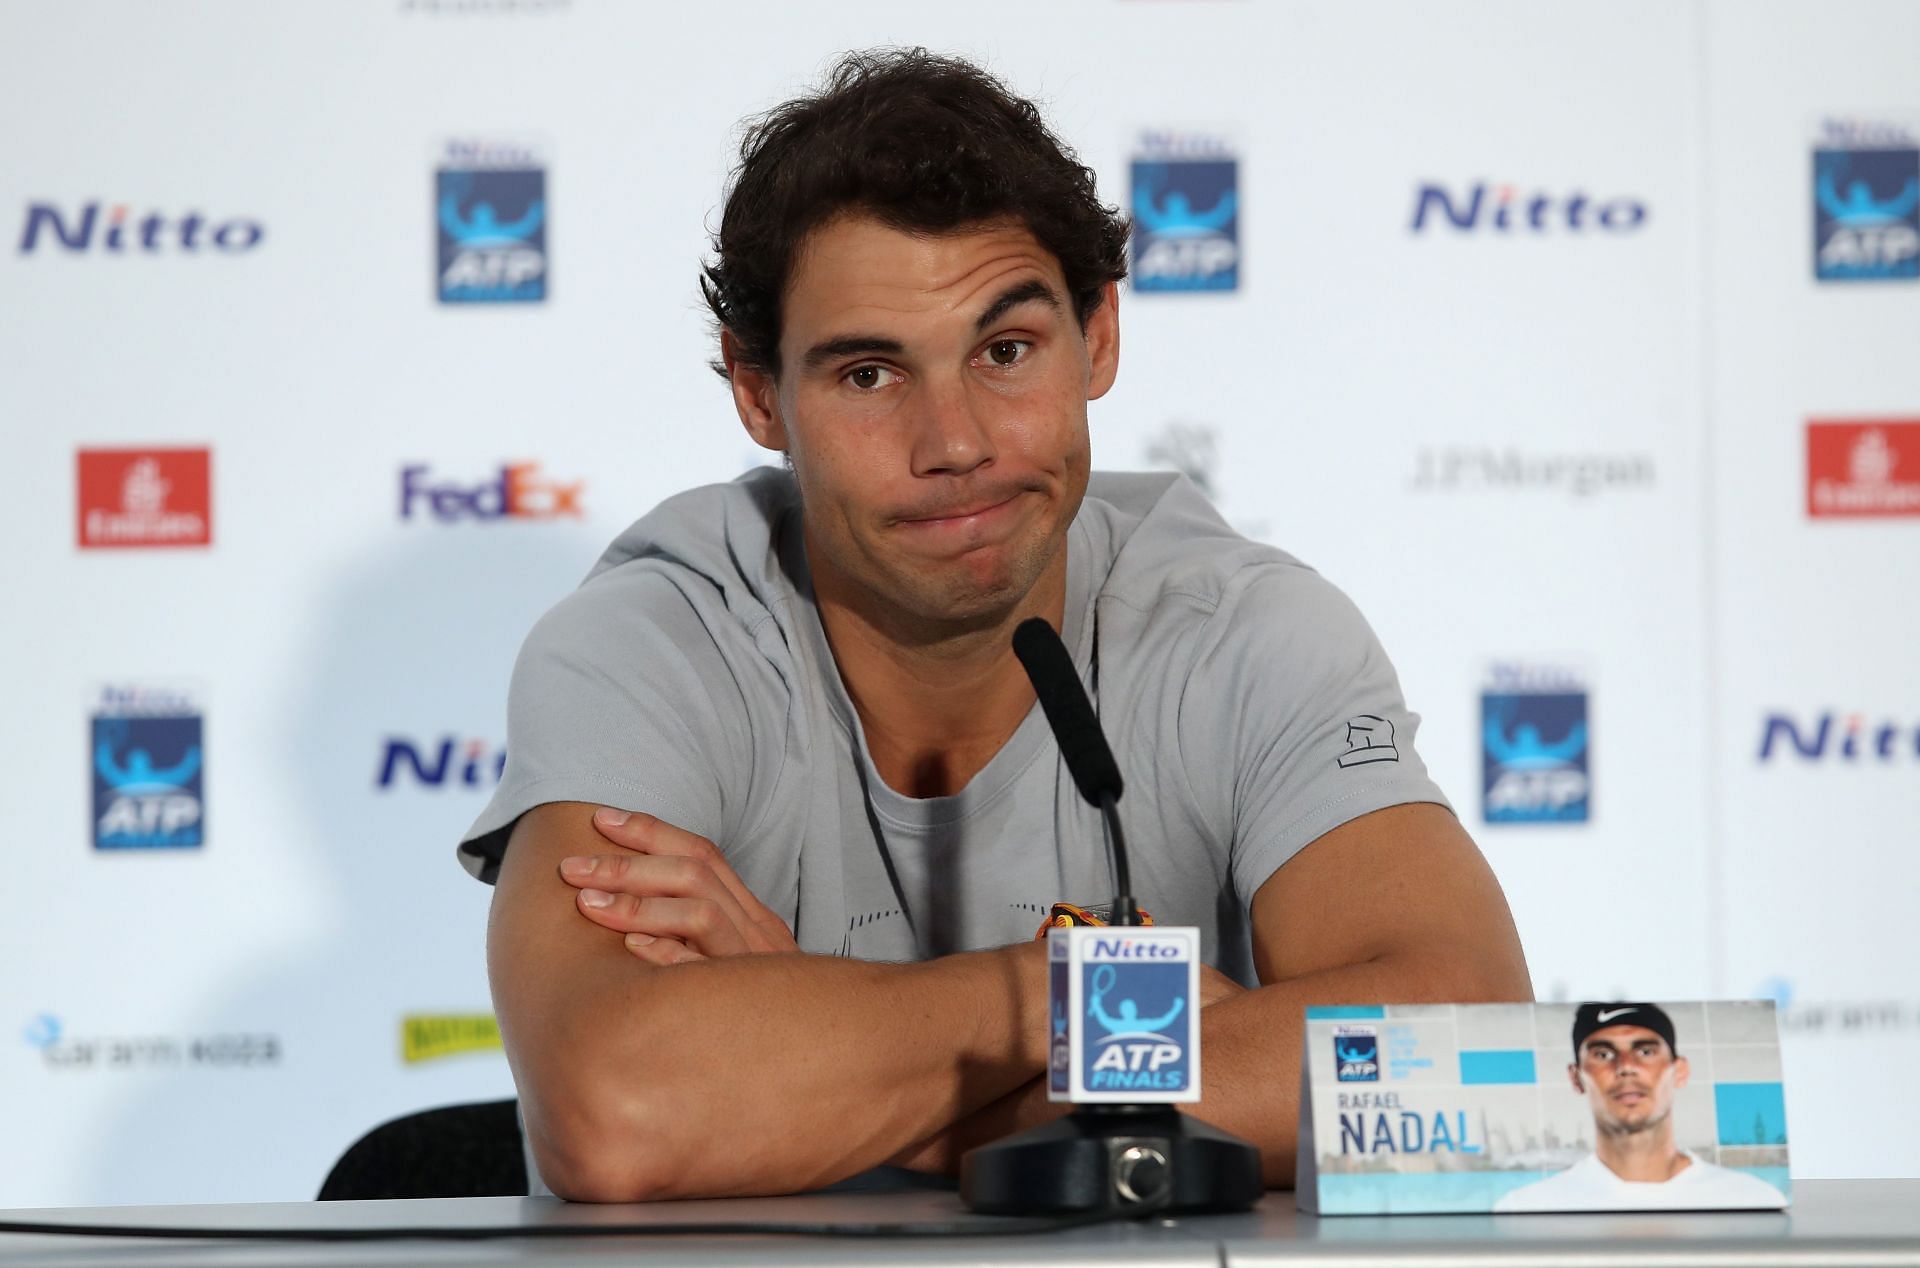 Rafael Nadal sent out a message of thanks to Spanish Royal Air Force pilots in Lithuania